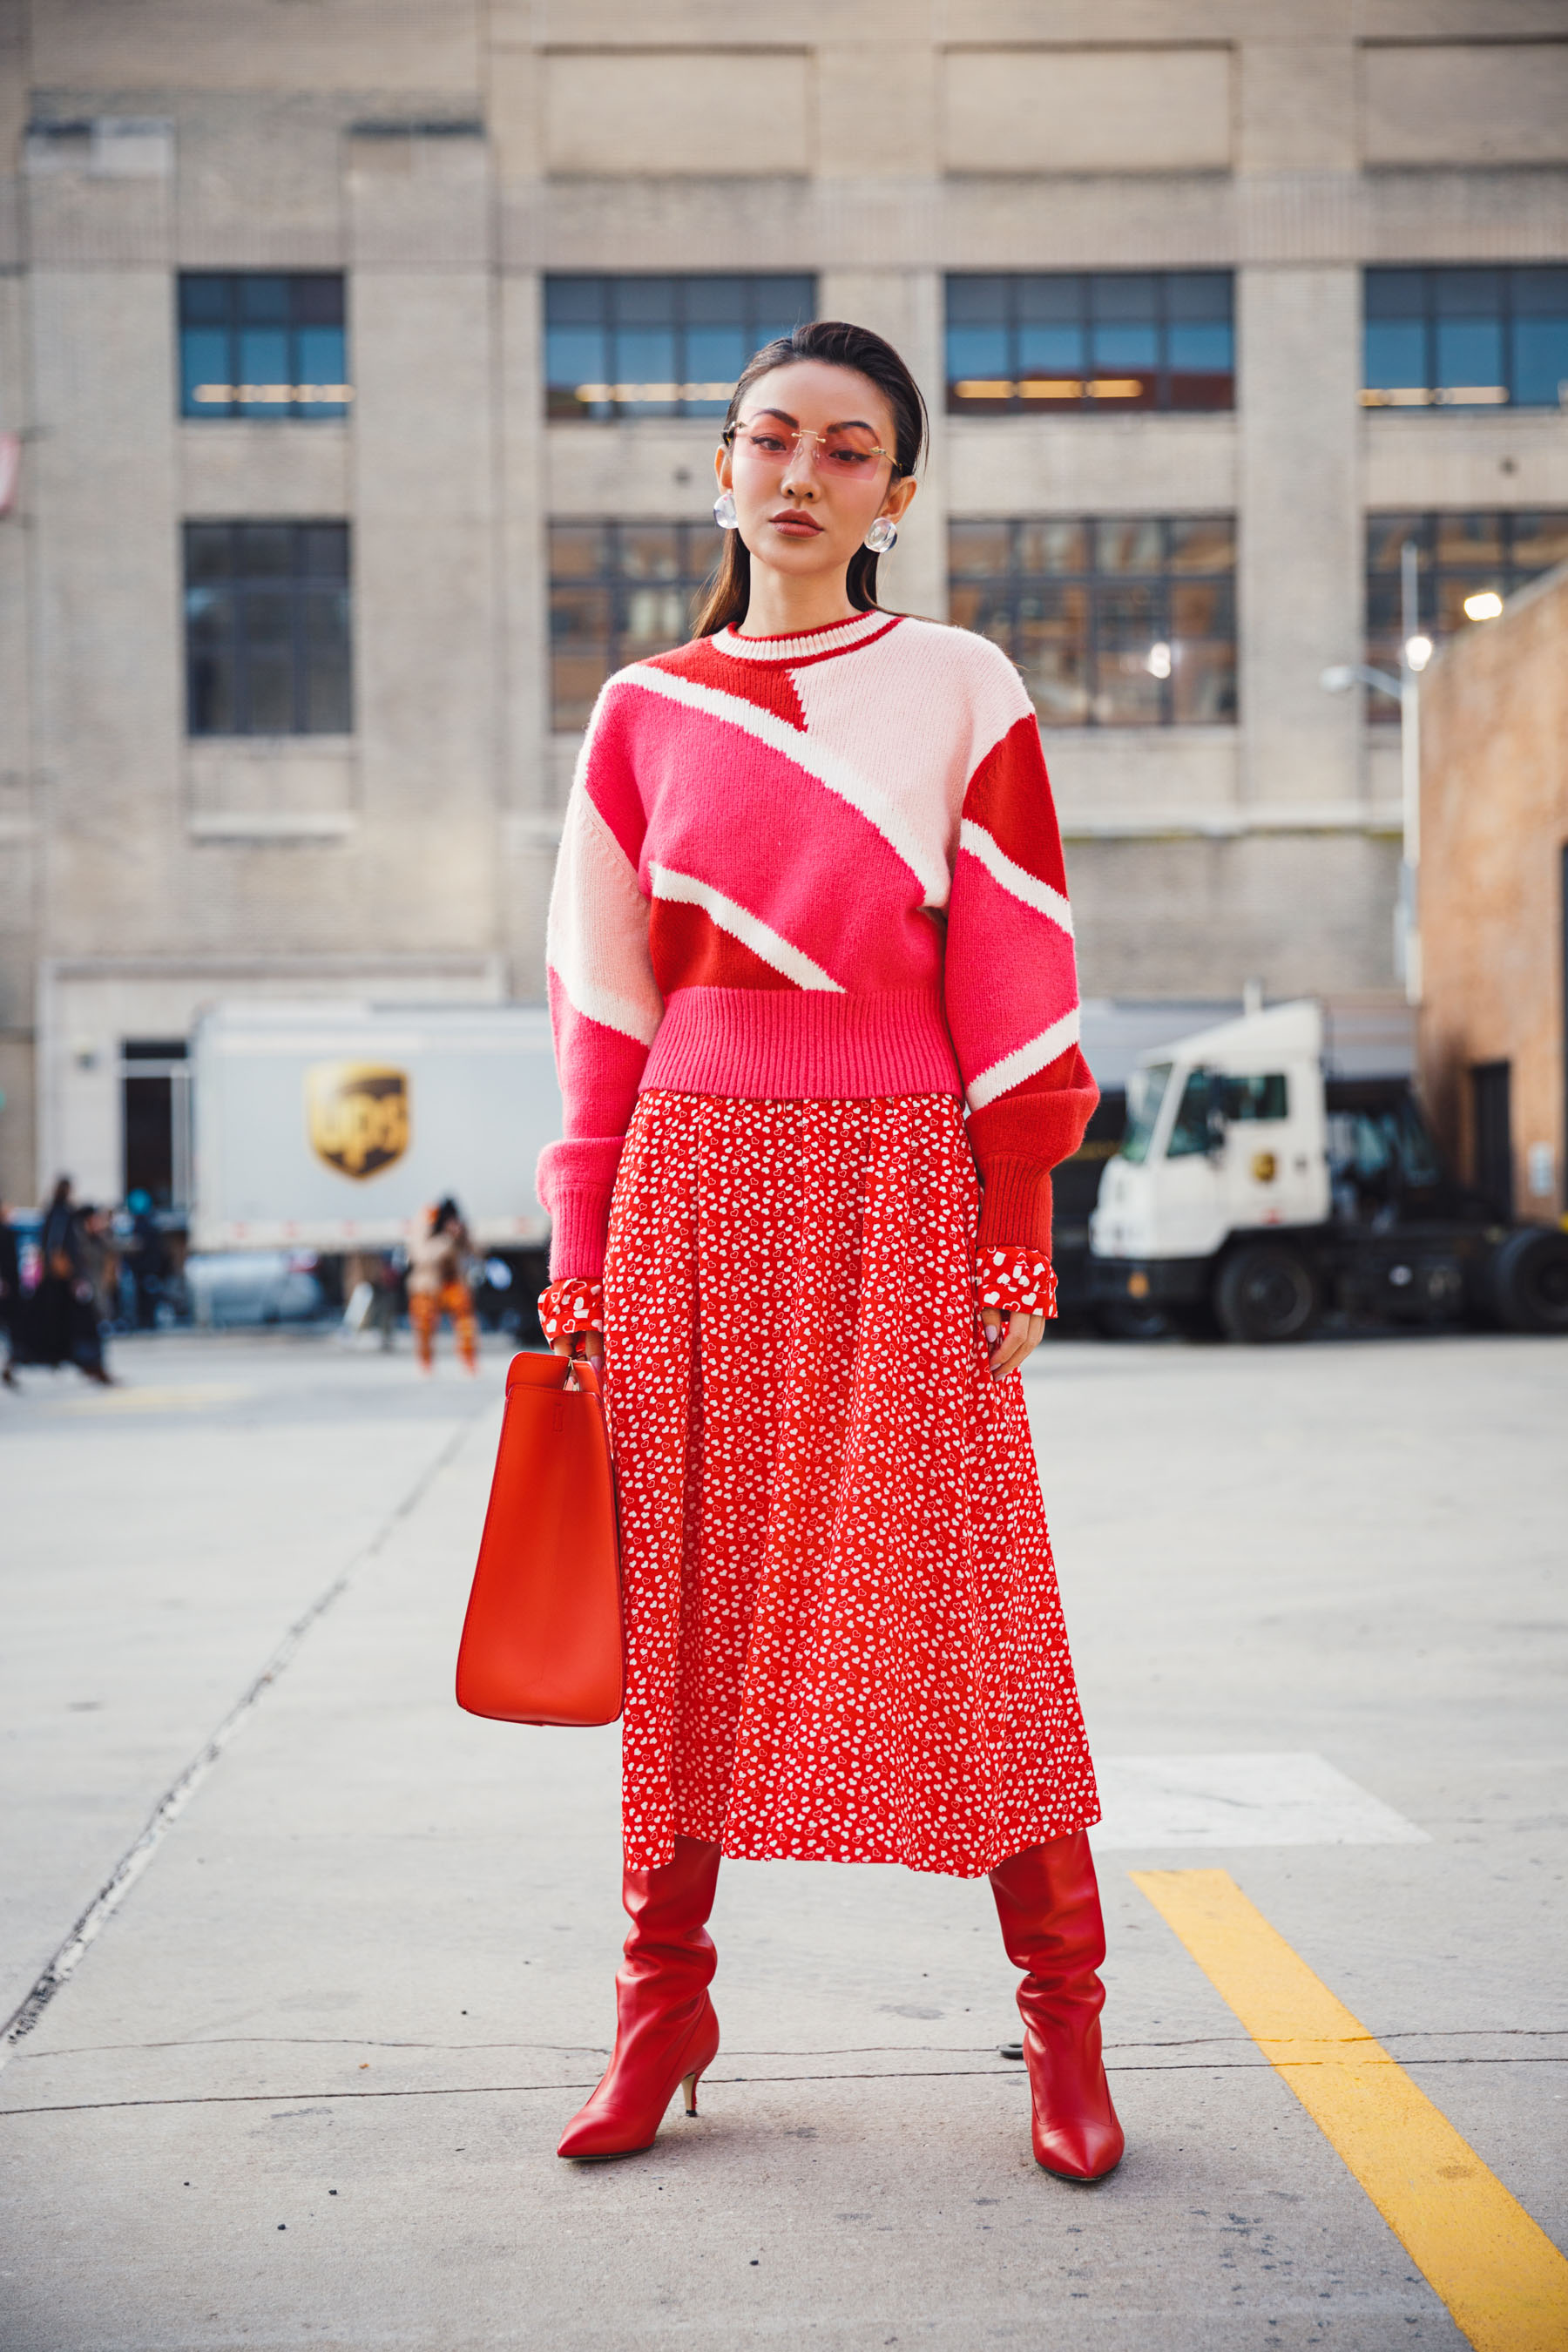 NYFW Day 5 Street Style // Notjessfashion.com // Pink and red outfit